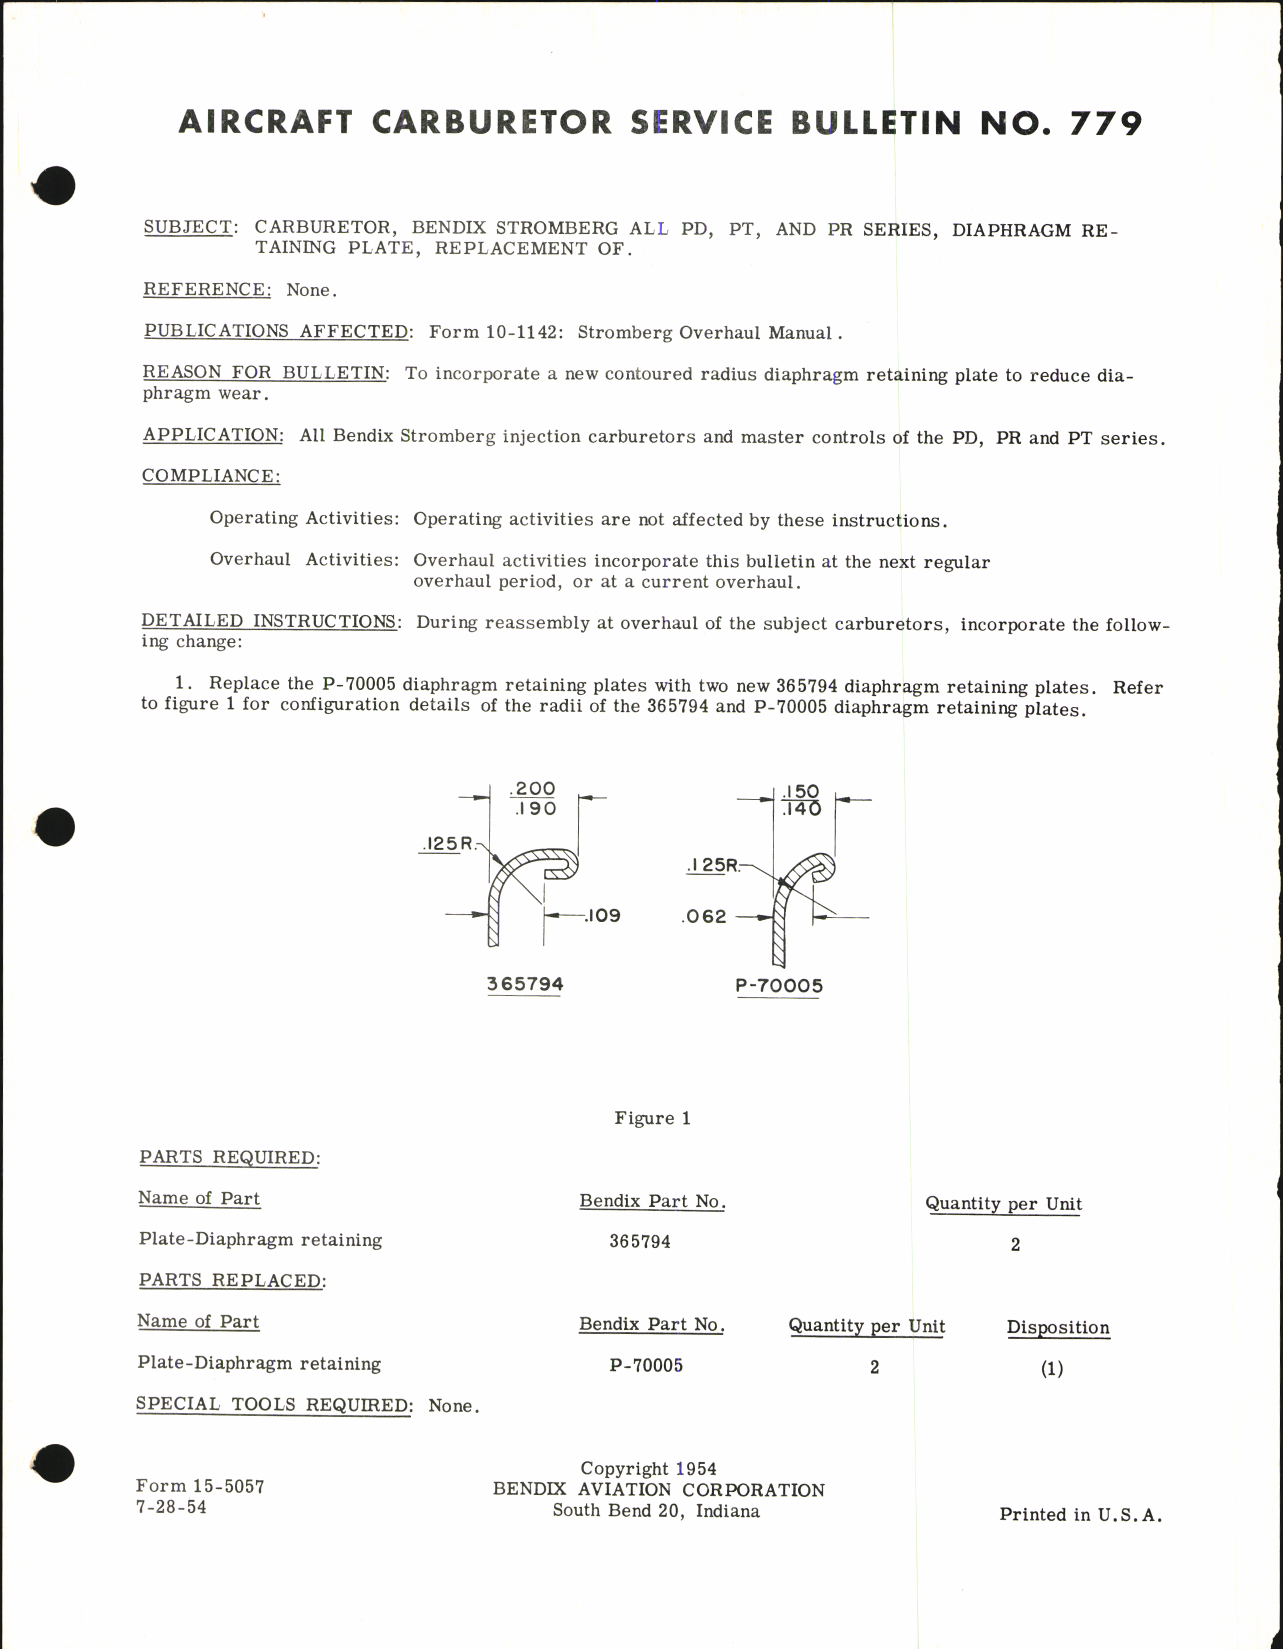 Sample page 1 from AirCorps Library document: Replacement of Diaphragm Retaining Plate on Bendix-Stromberg Carburetor